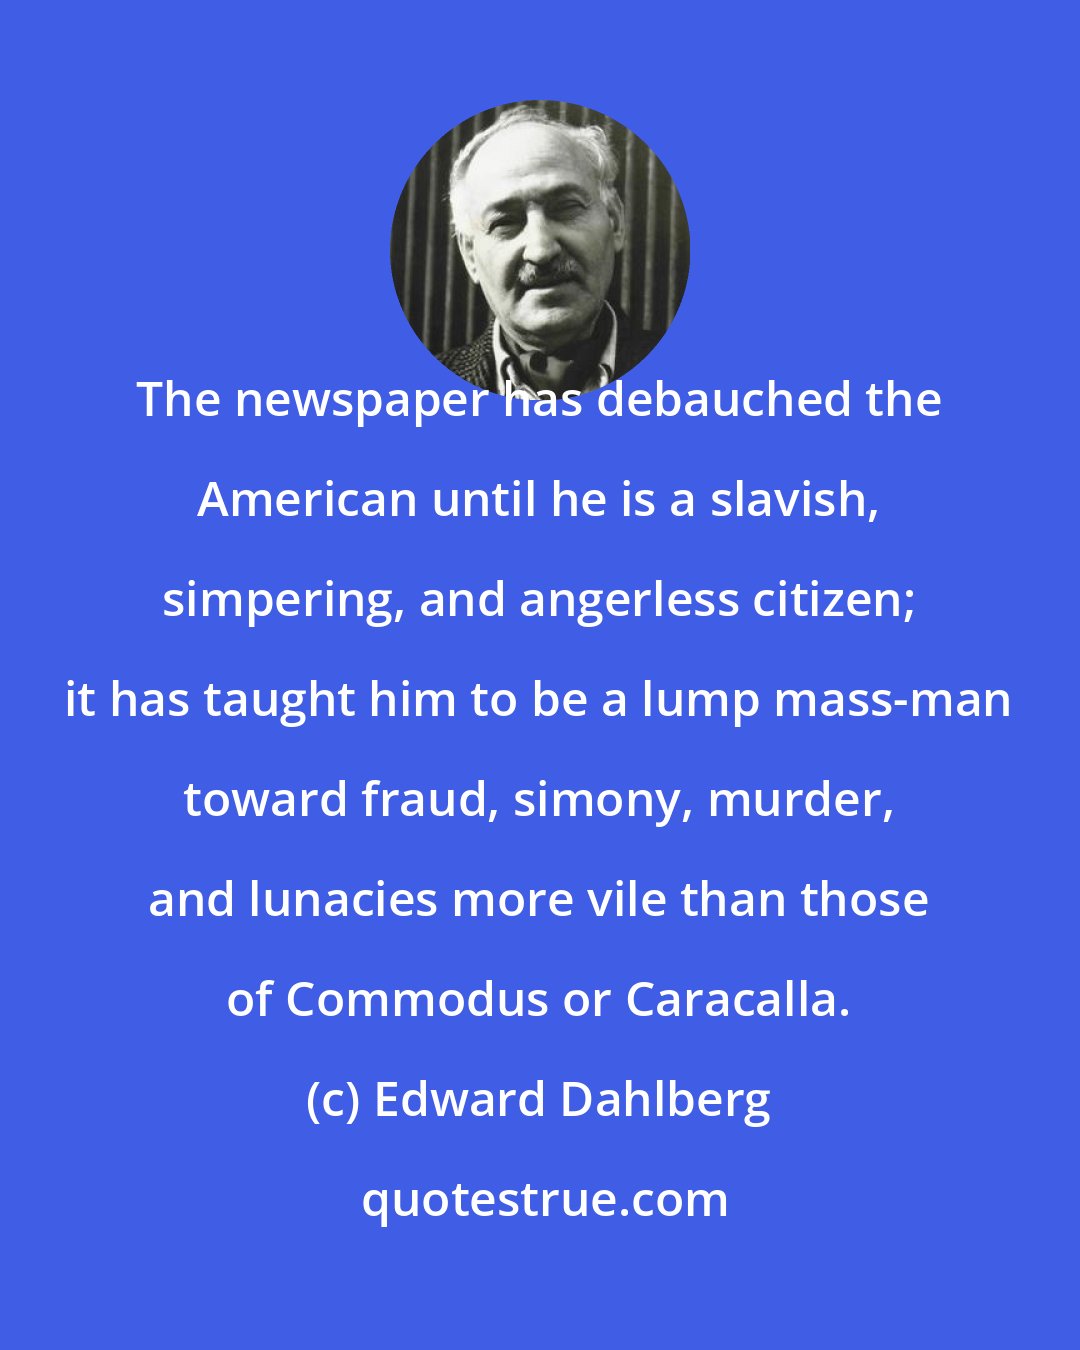 Edward Dahlberg: The newspaper has debauched the American until he is a slavish, simpering, and angerless citizen; it has taught him to be a lump mass-man toward fraud, simony, murder, and lunacies more vile than those of Commodus or Caracalla.